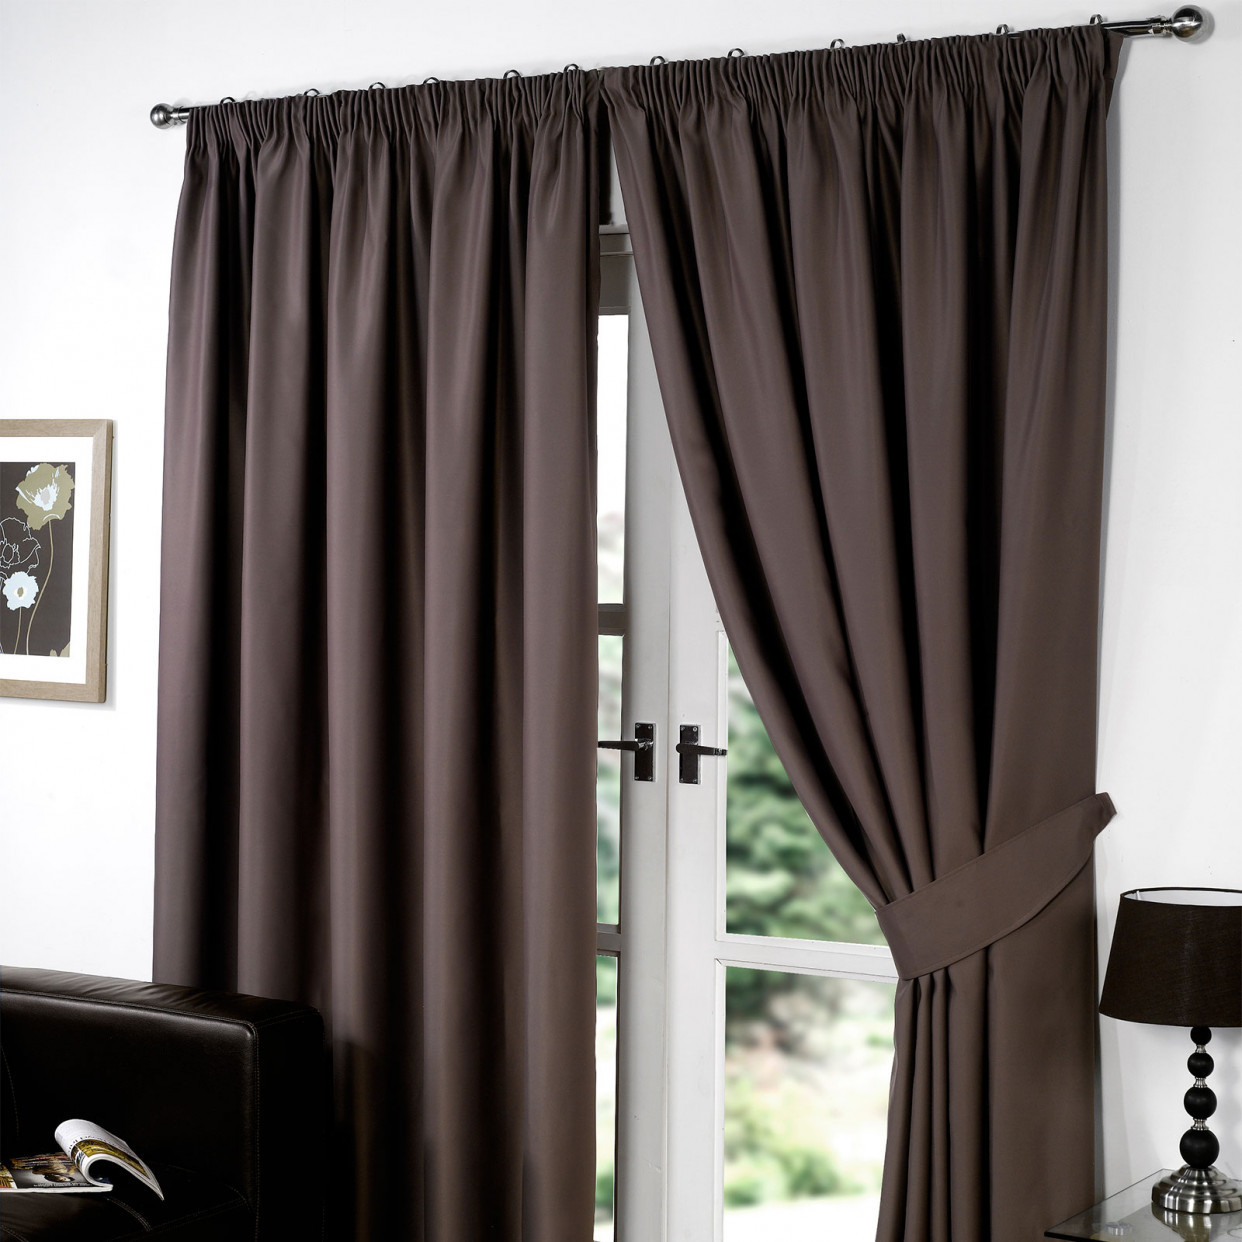 Pencil Pleat Thermal Blackout Fully Lined Curtains - Chocolate 46x72>